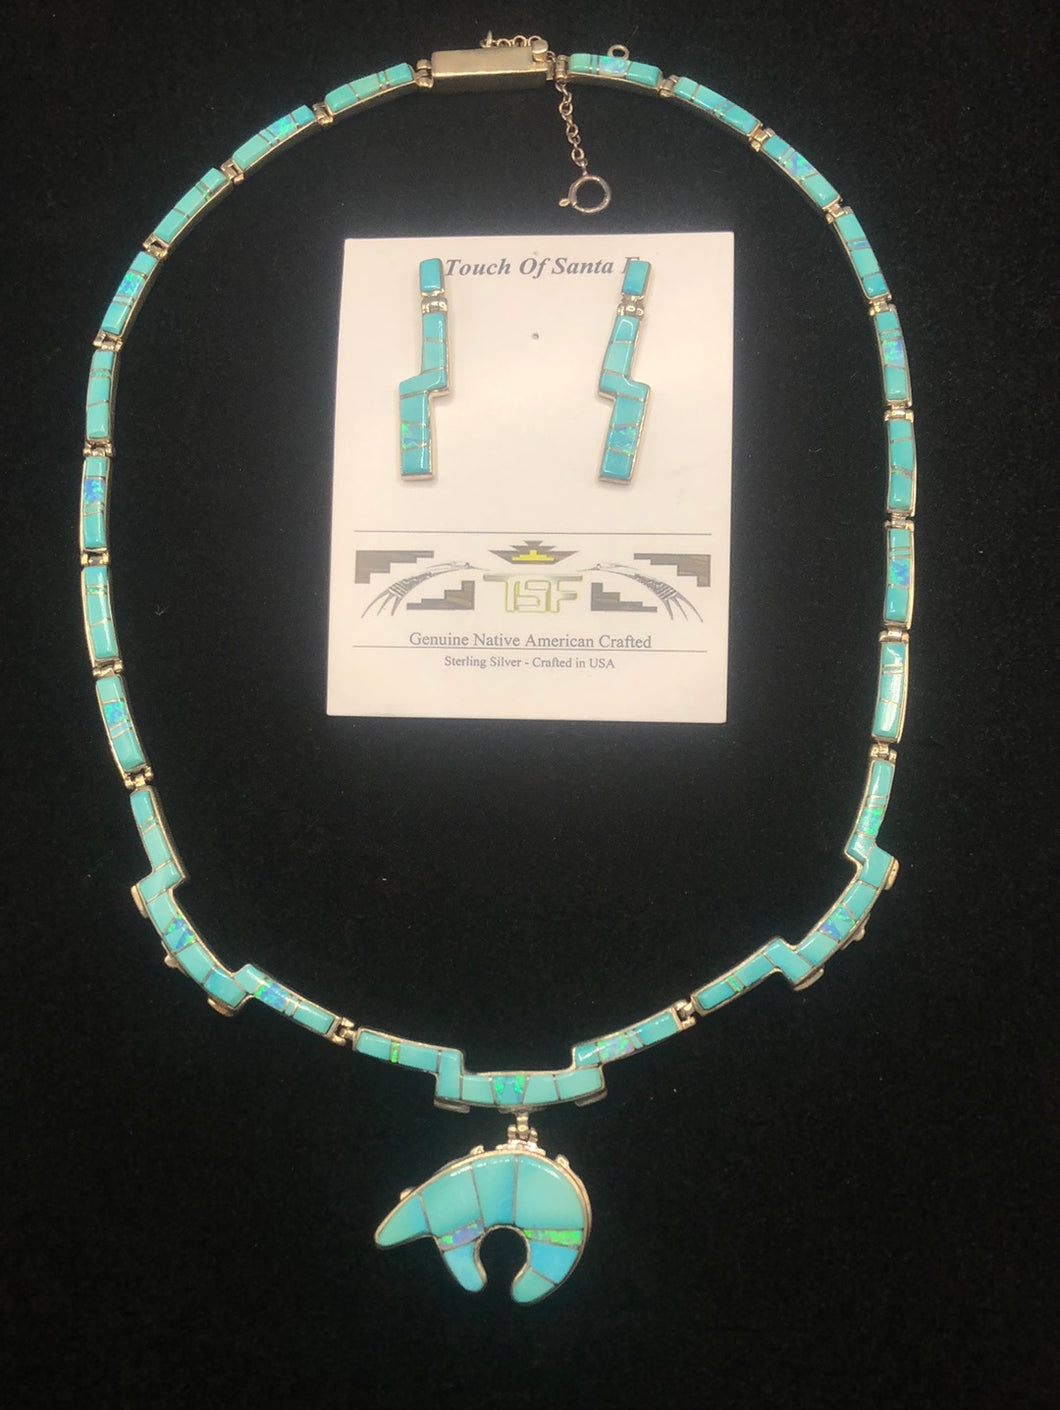 A Touch Of Santa Fe Bear Necklace and Earring Set!